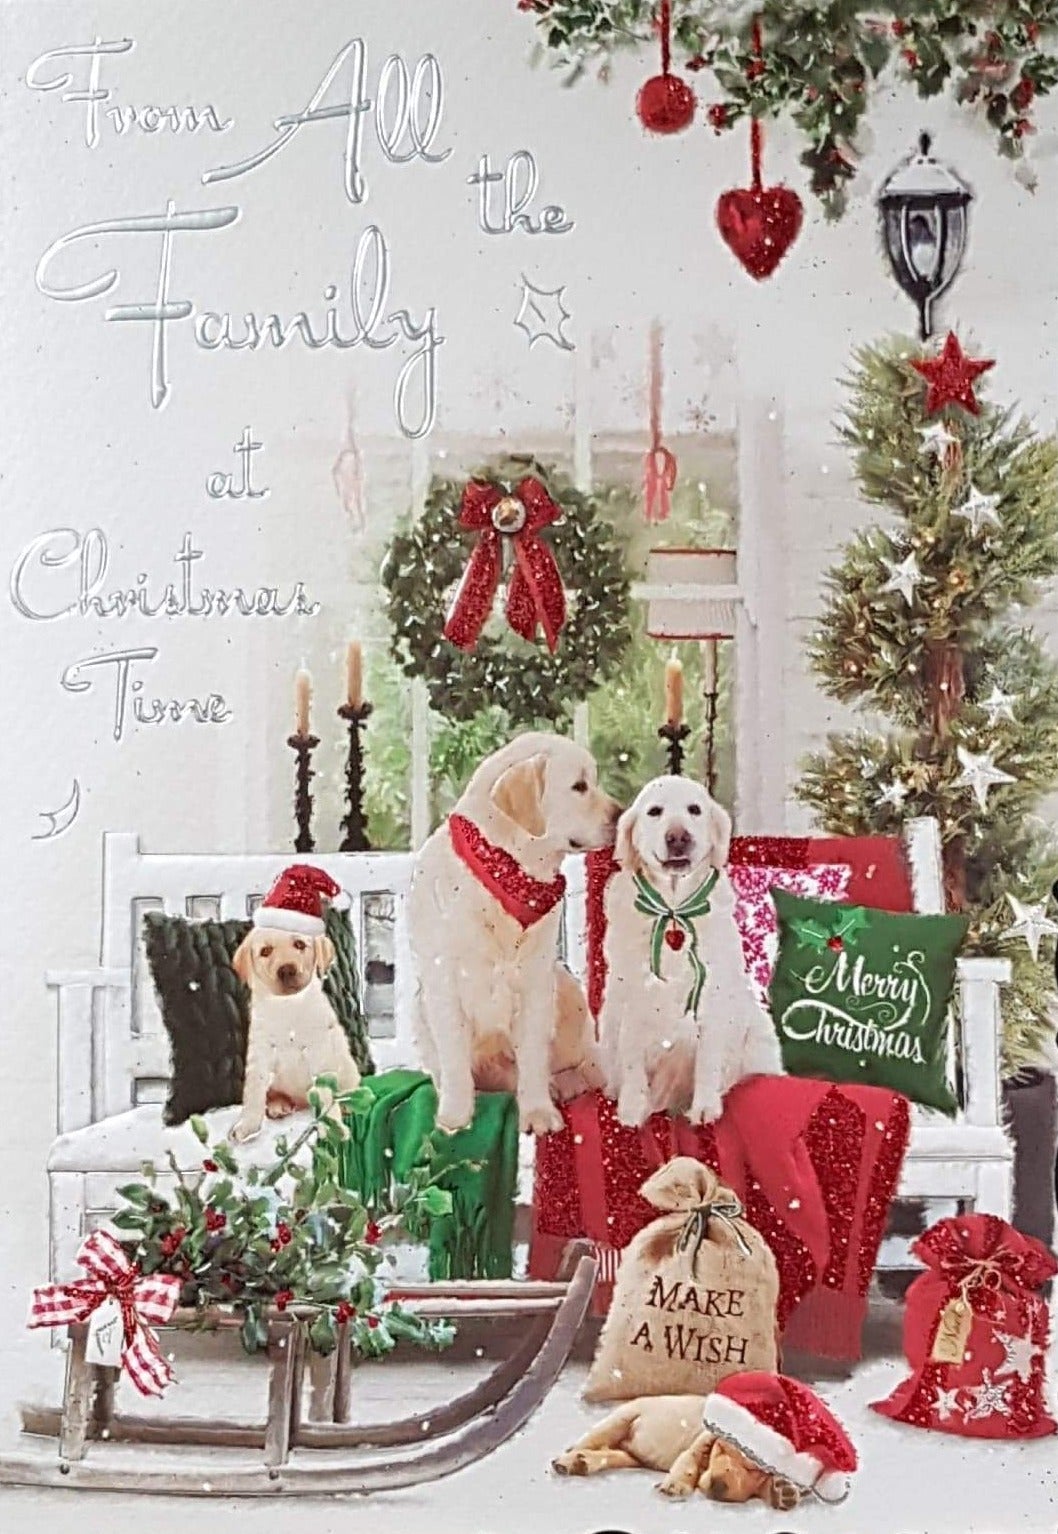 From All The Family Christmas Card - Happy Christmas Wishes & Golden Retrievers in Decorated Room